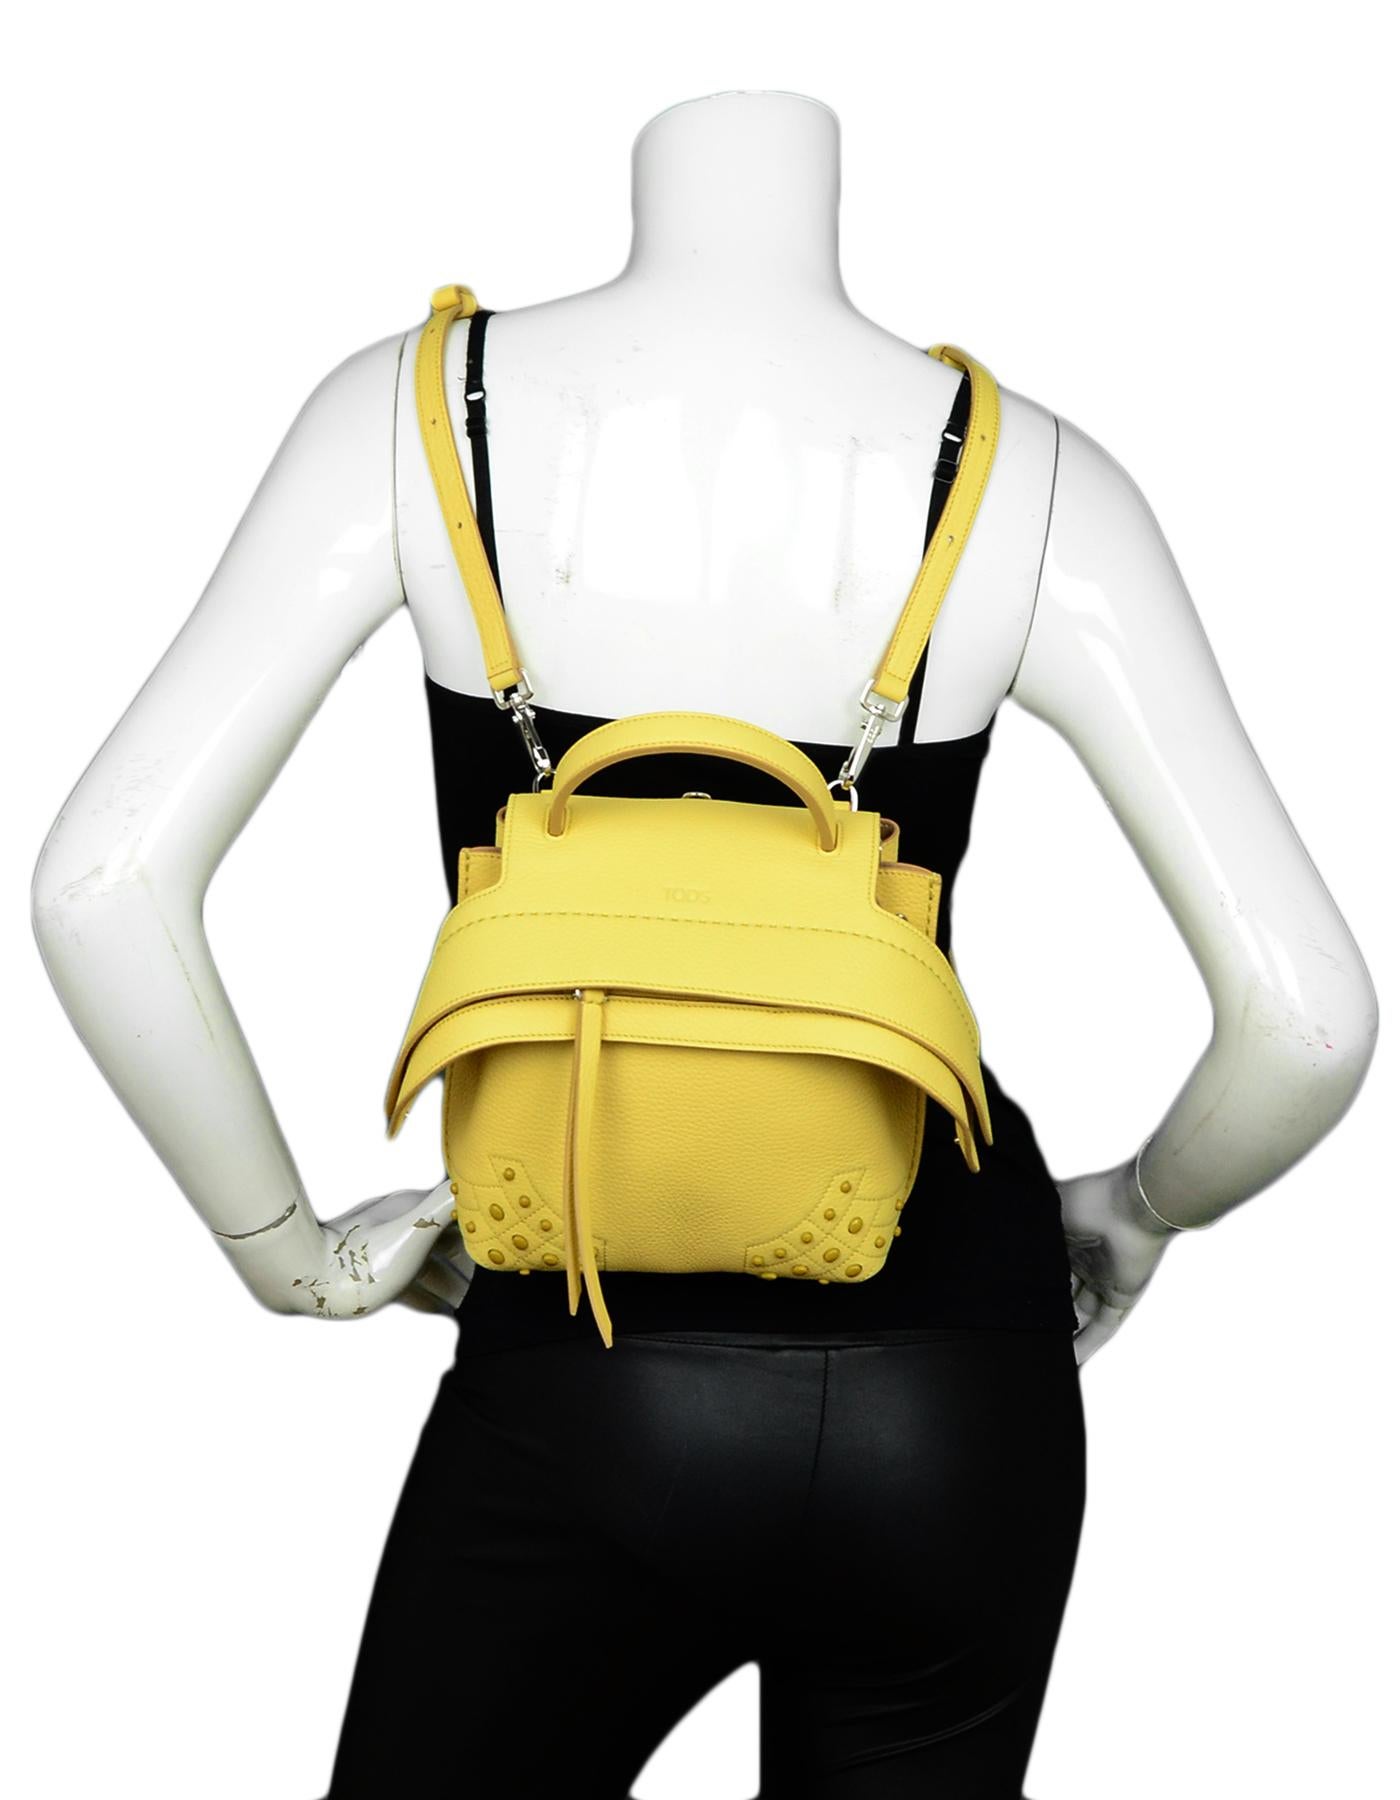 Tod's Yellow Wave Leather Convertible Mini Backpack Bag

Made In: Italy
Color: Yellow
Hardware: Silvertone
Materials: Leather
Lining: Suede
Closure/Opening: Top zip
Exterior Pockets: One flat pocket with snap closure
Interior Pockets: One flat